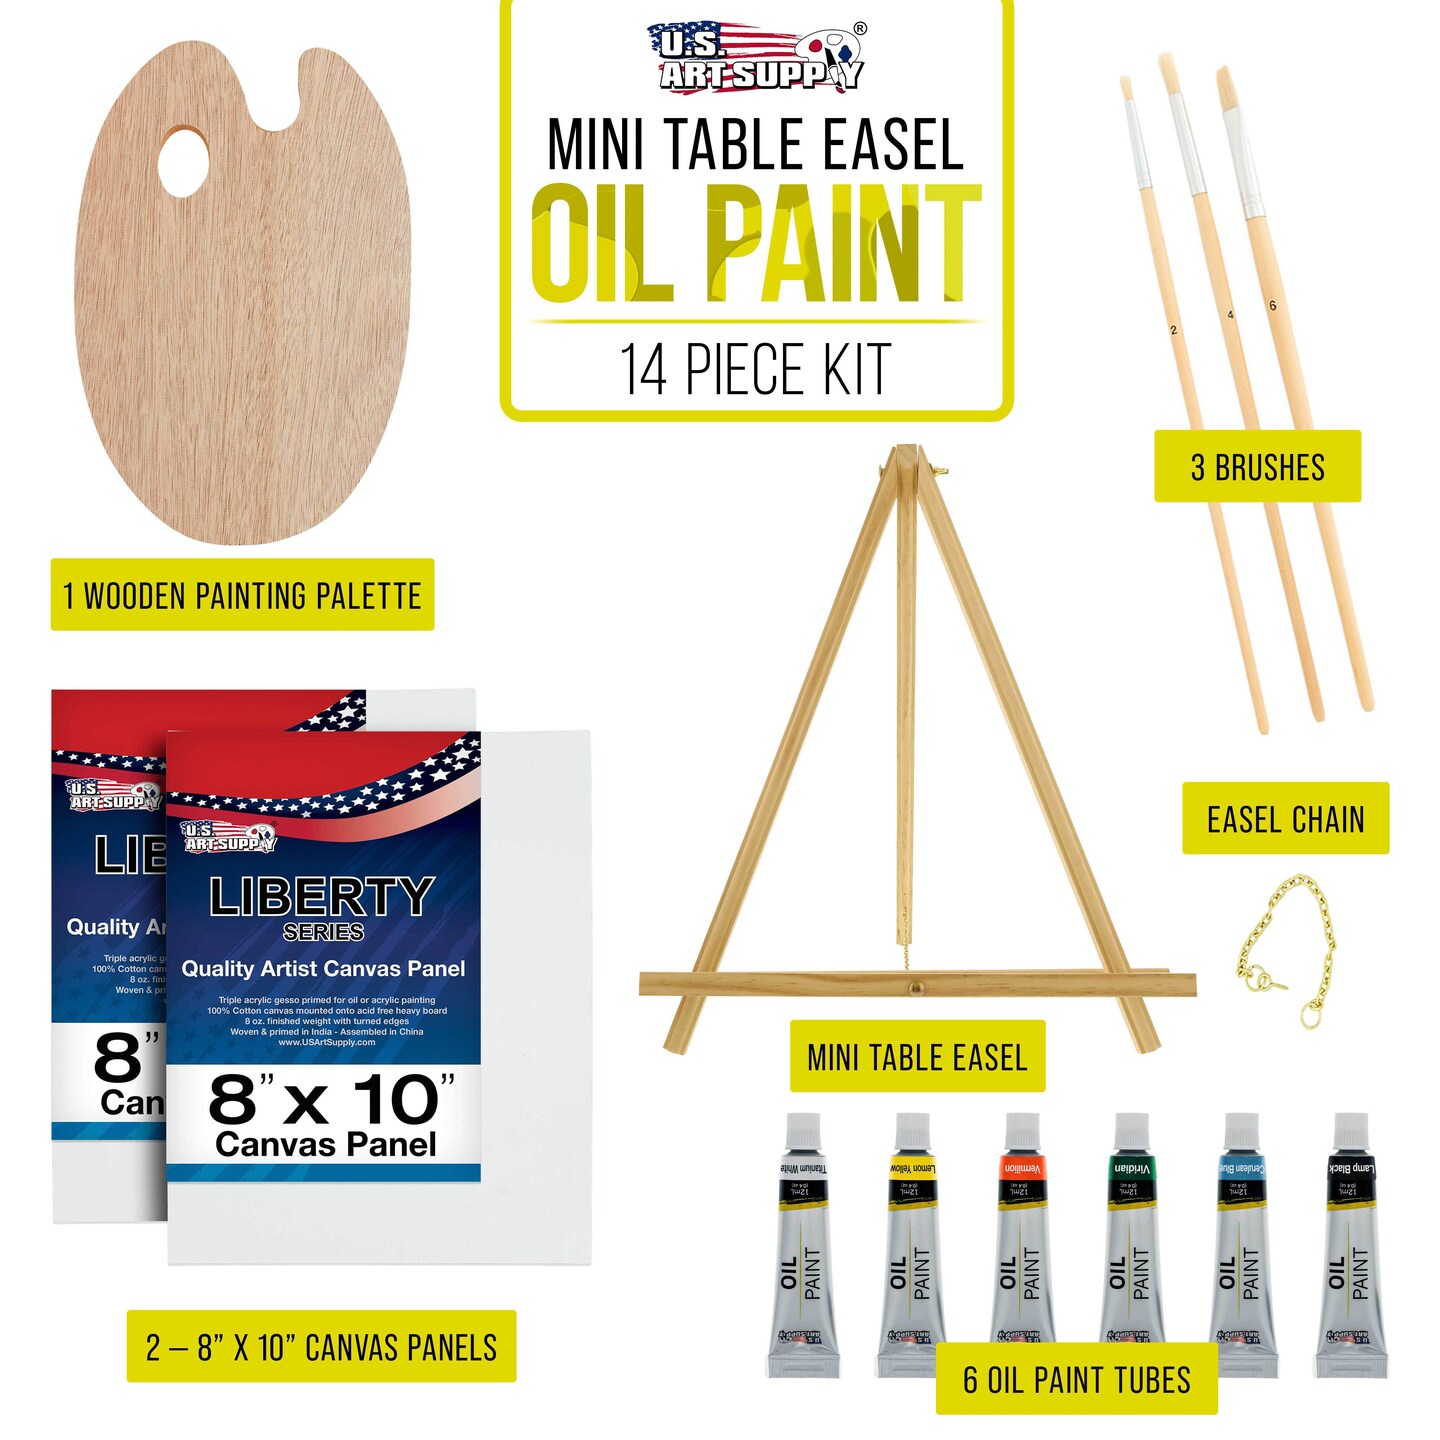 Artist paintbrushes, paint tubes and small easel with canvas